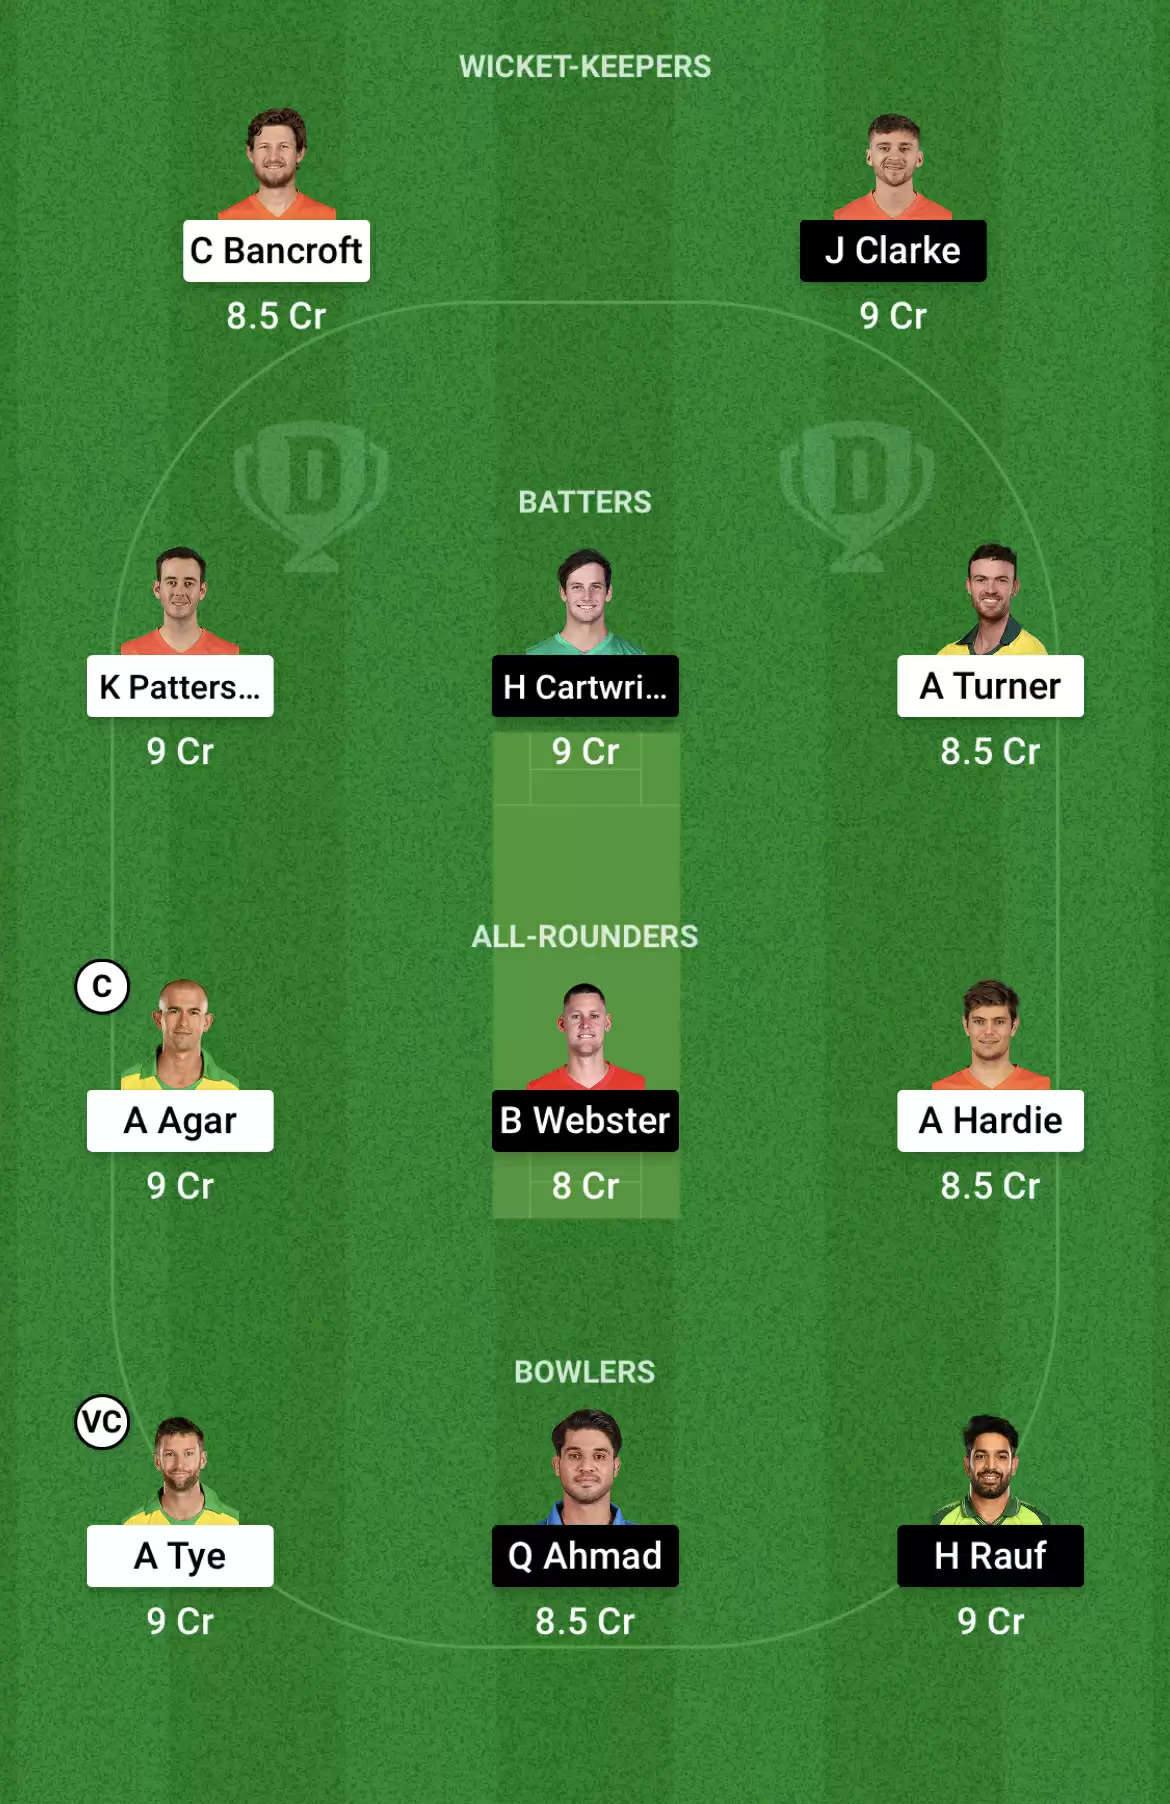 SCO vs STA Dream11 Prediction, BBL 2021/22, rescheduled Match 27: Playing XI, Fantasy Cricket Tips, Team, Weather Updates and Pitch Report